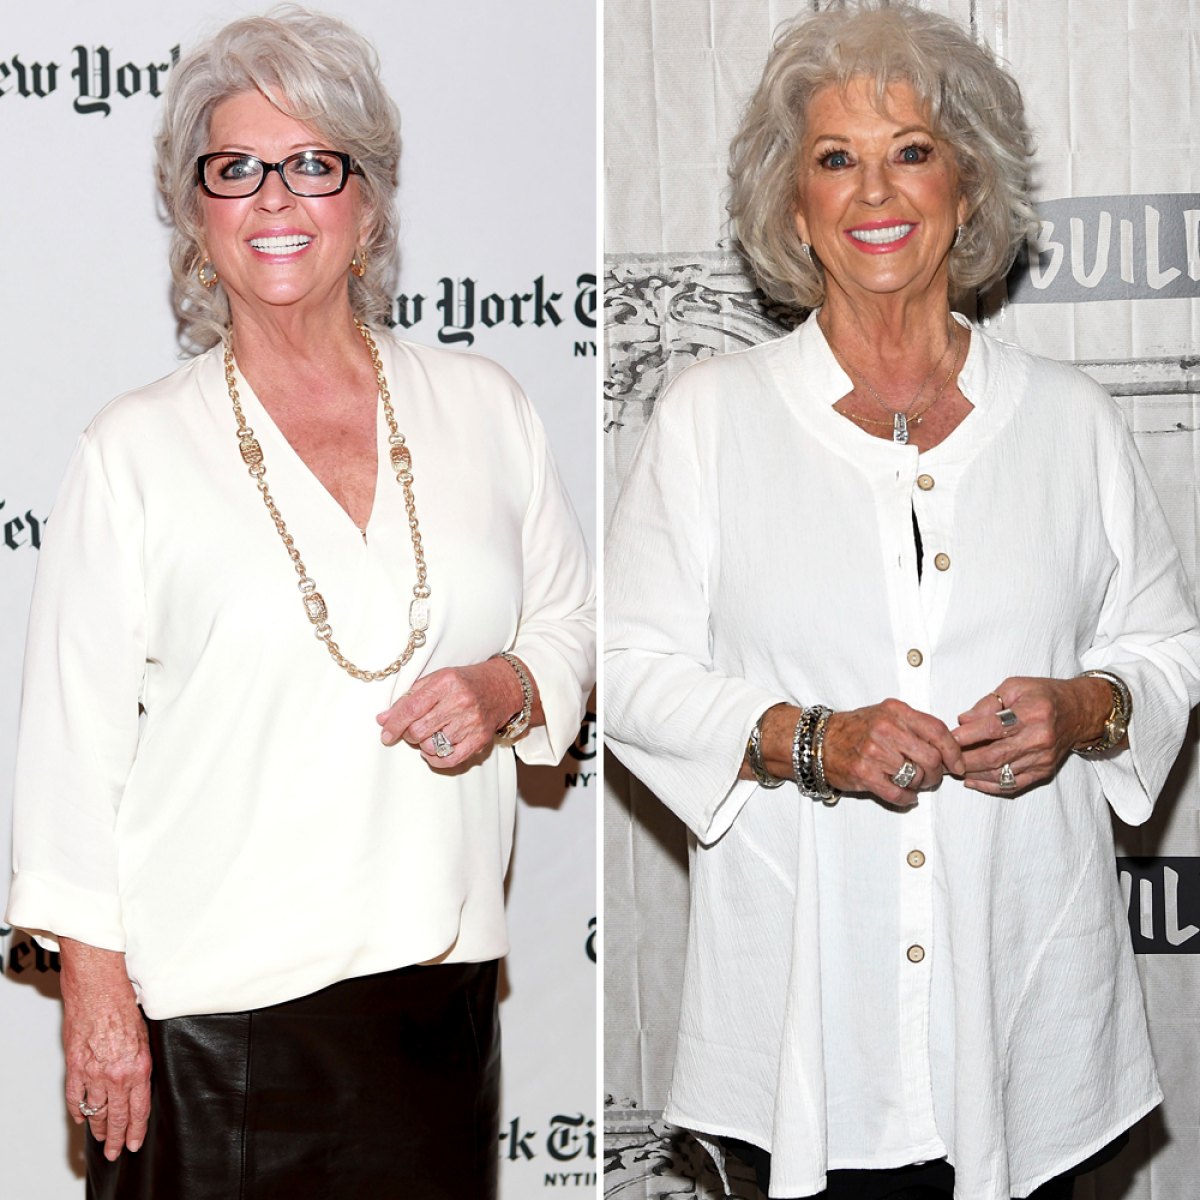 paula deen before and after weight